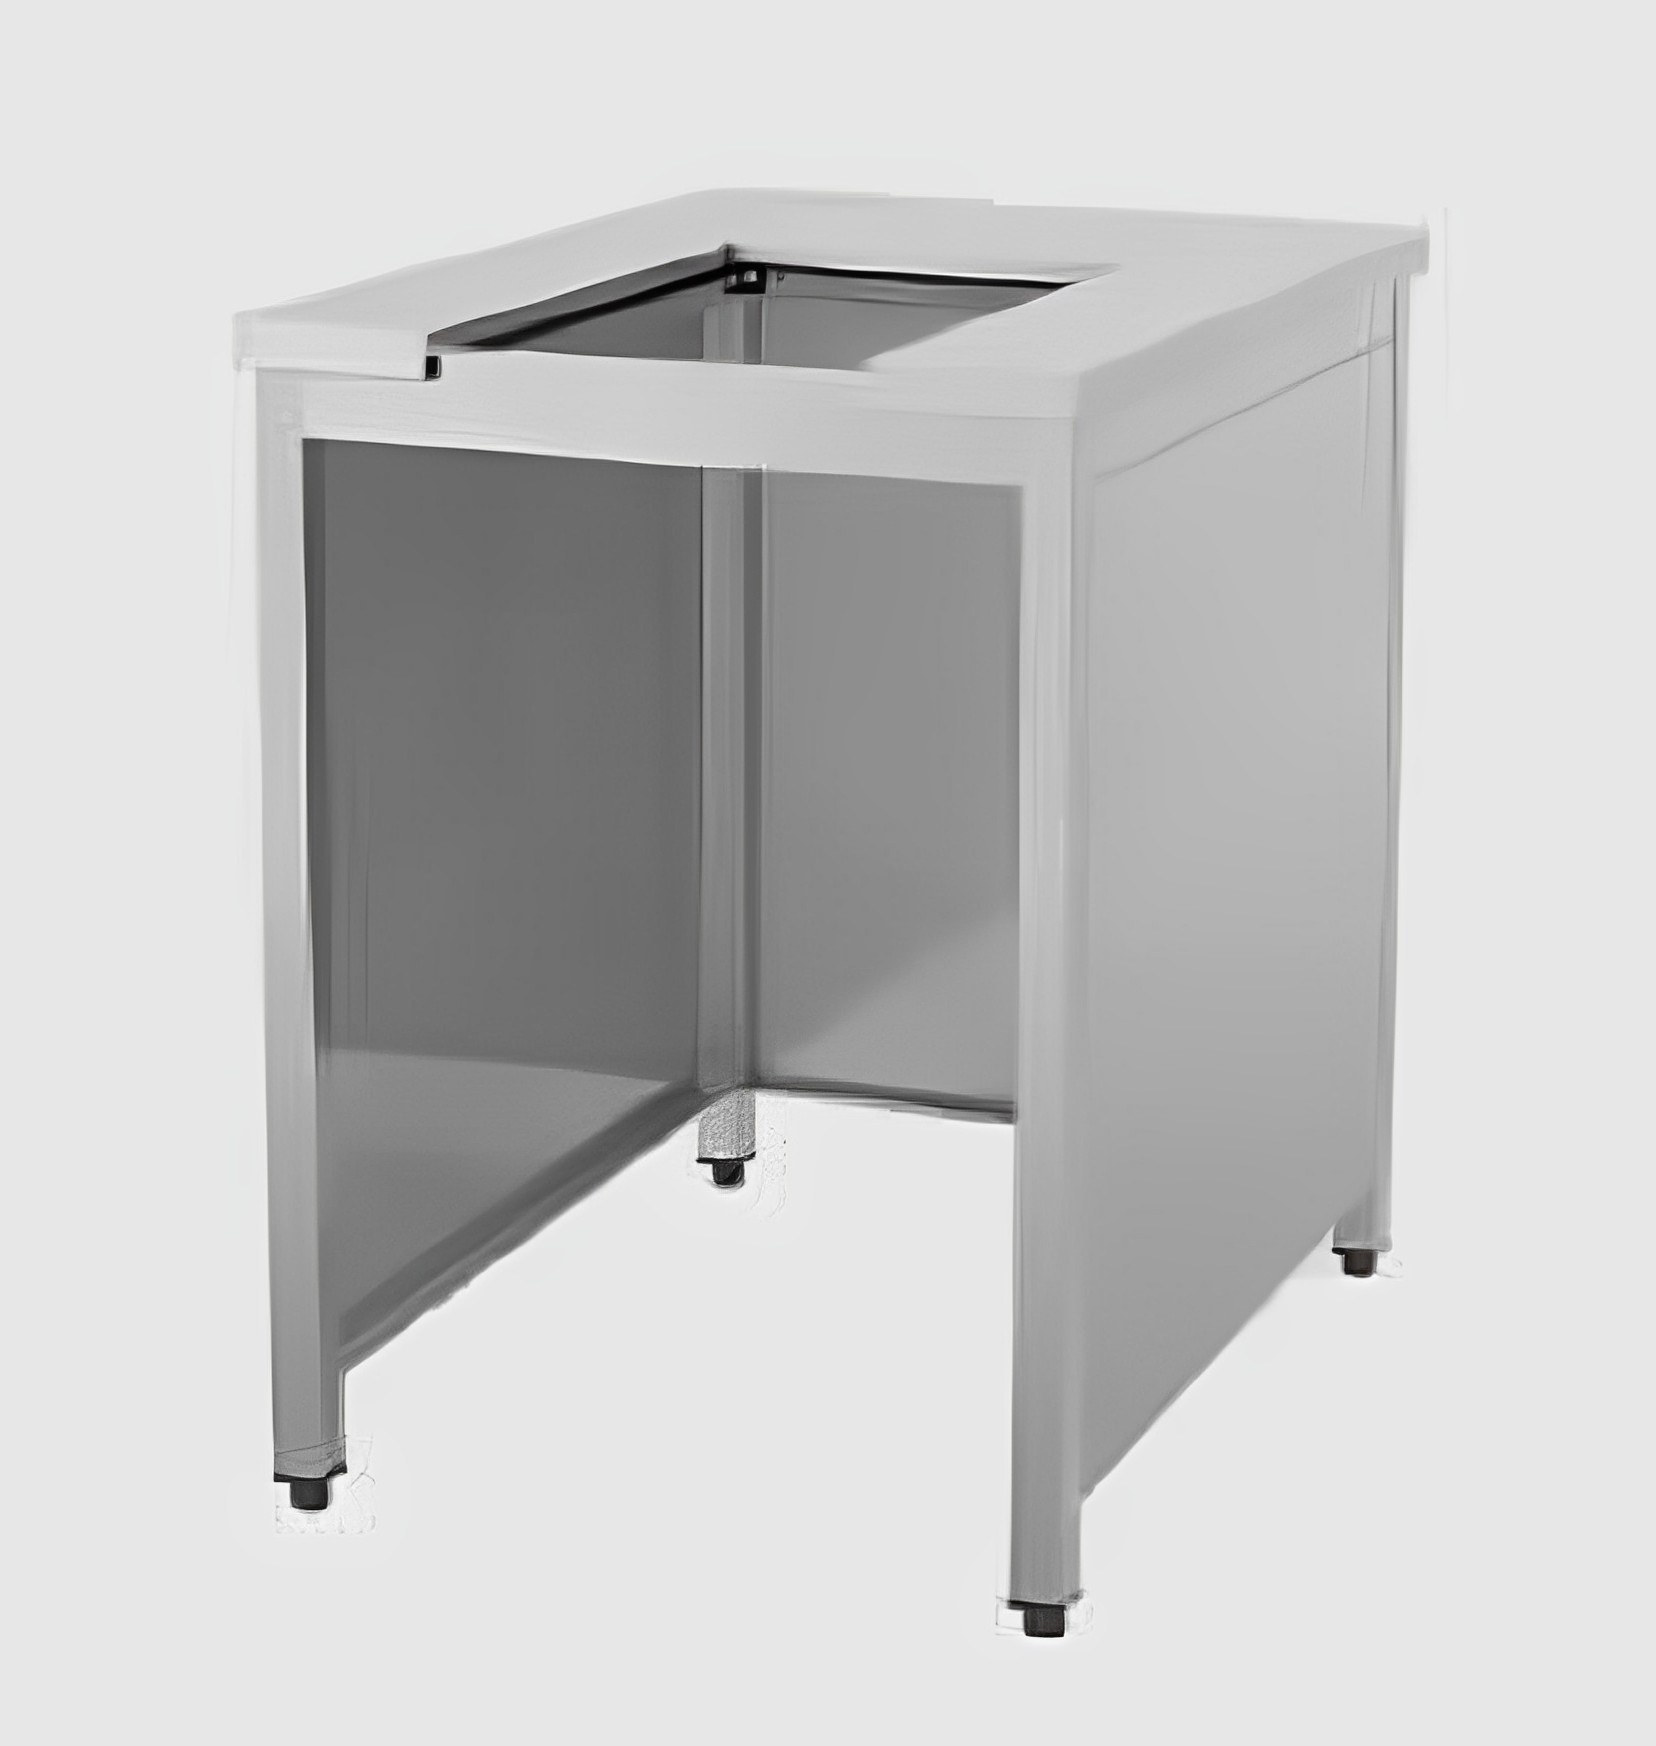 PIZZAGROUP SPSA Stands in stainless steel